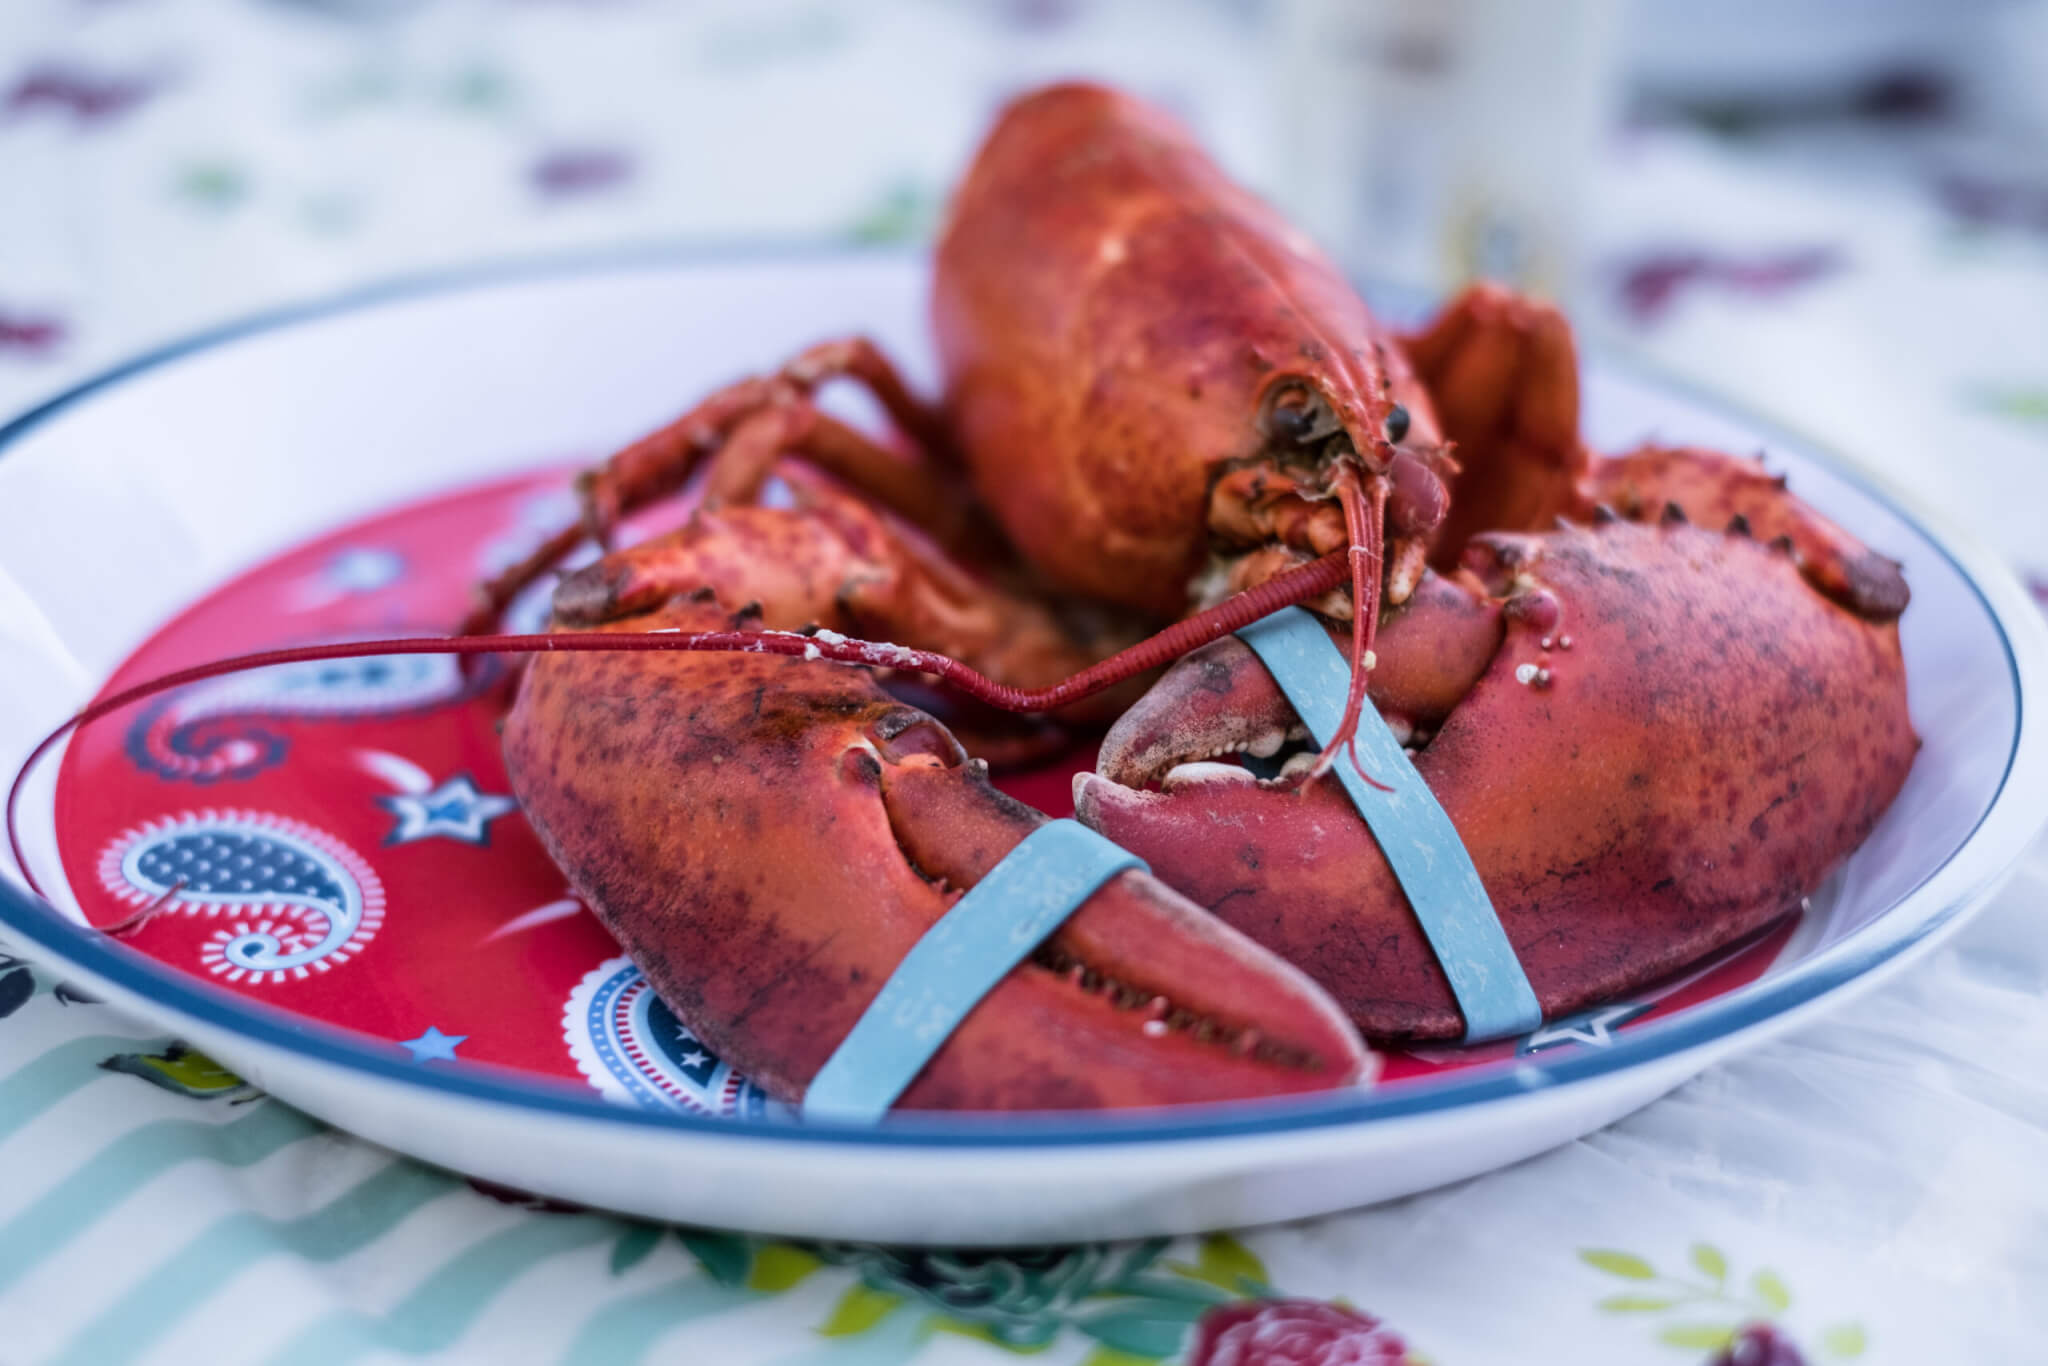 Fresh Maine lobster boiled to perfection, ready for eating on a warm summer day.